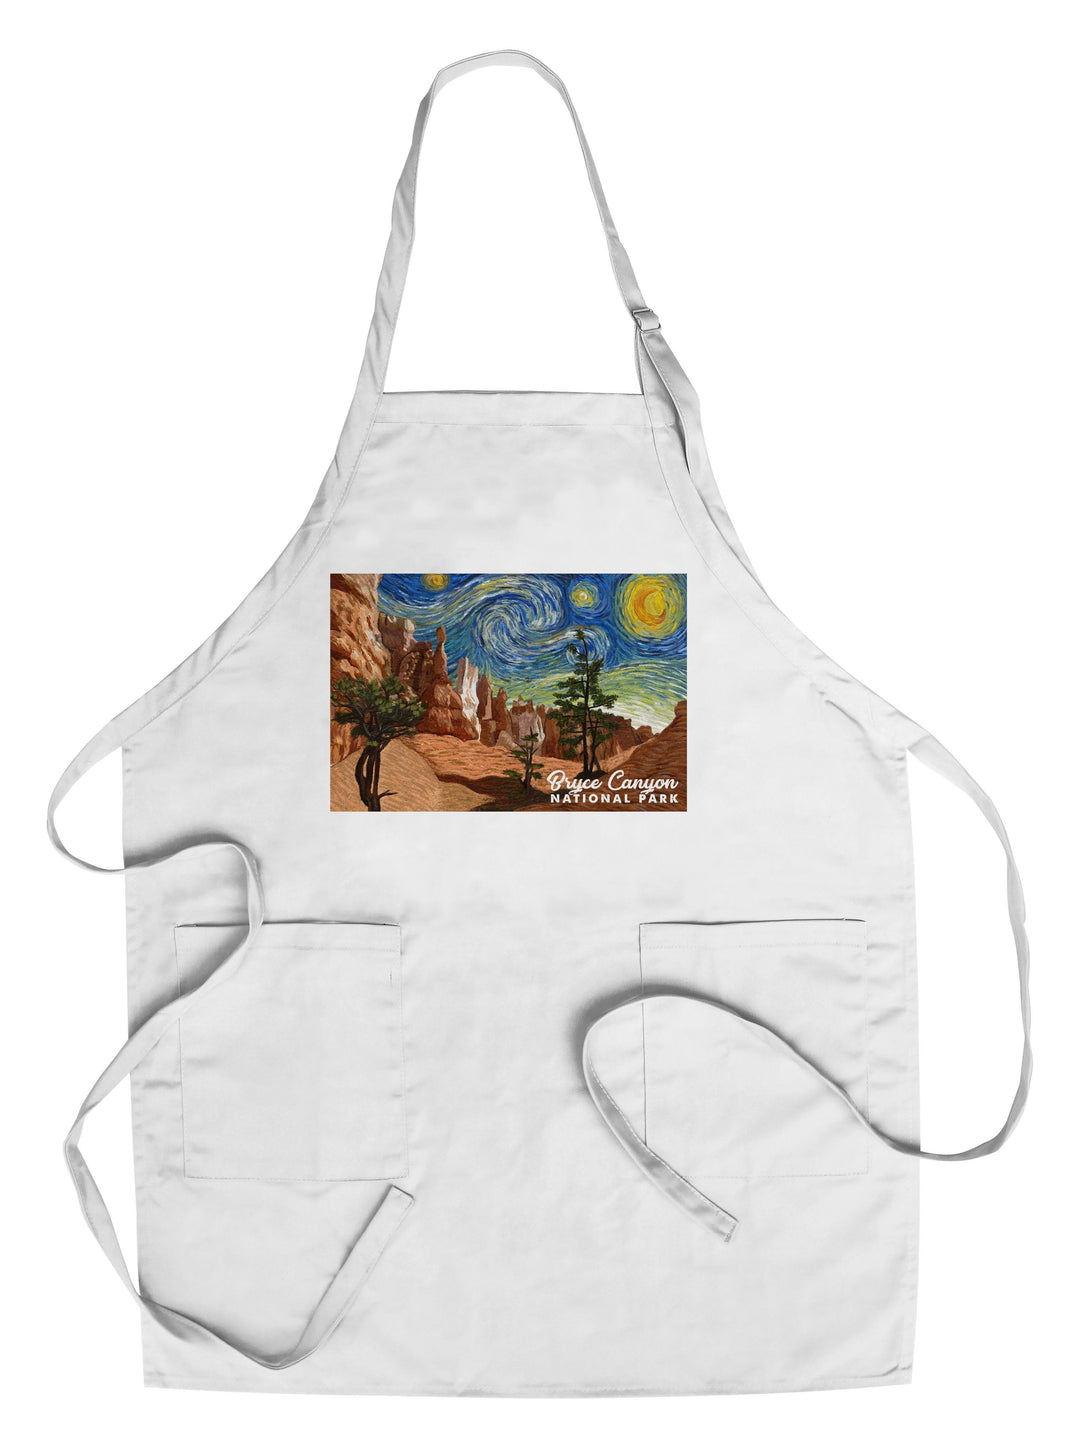 Bryce Canyon National Park, Starry Night National Park Series, Lantern Press Artwork, Towels and Aprons Kitchen Lantern Press Chef's Apron 